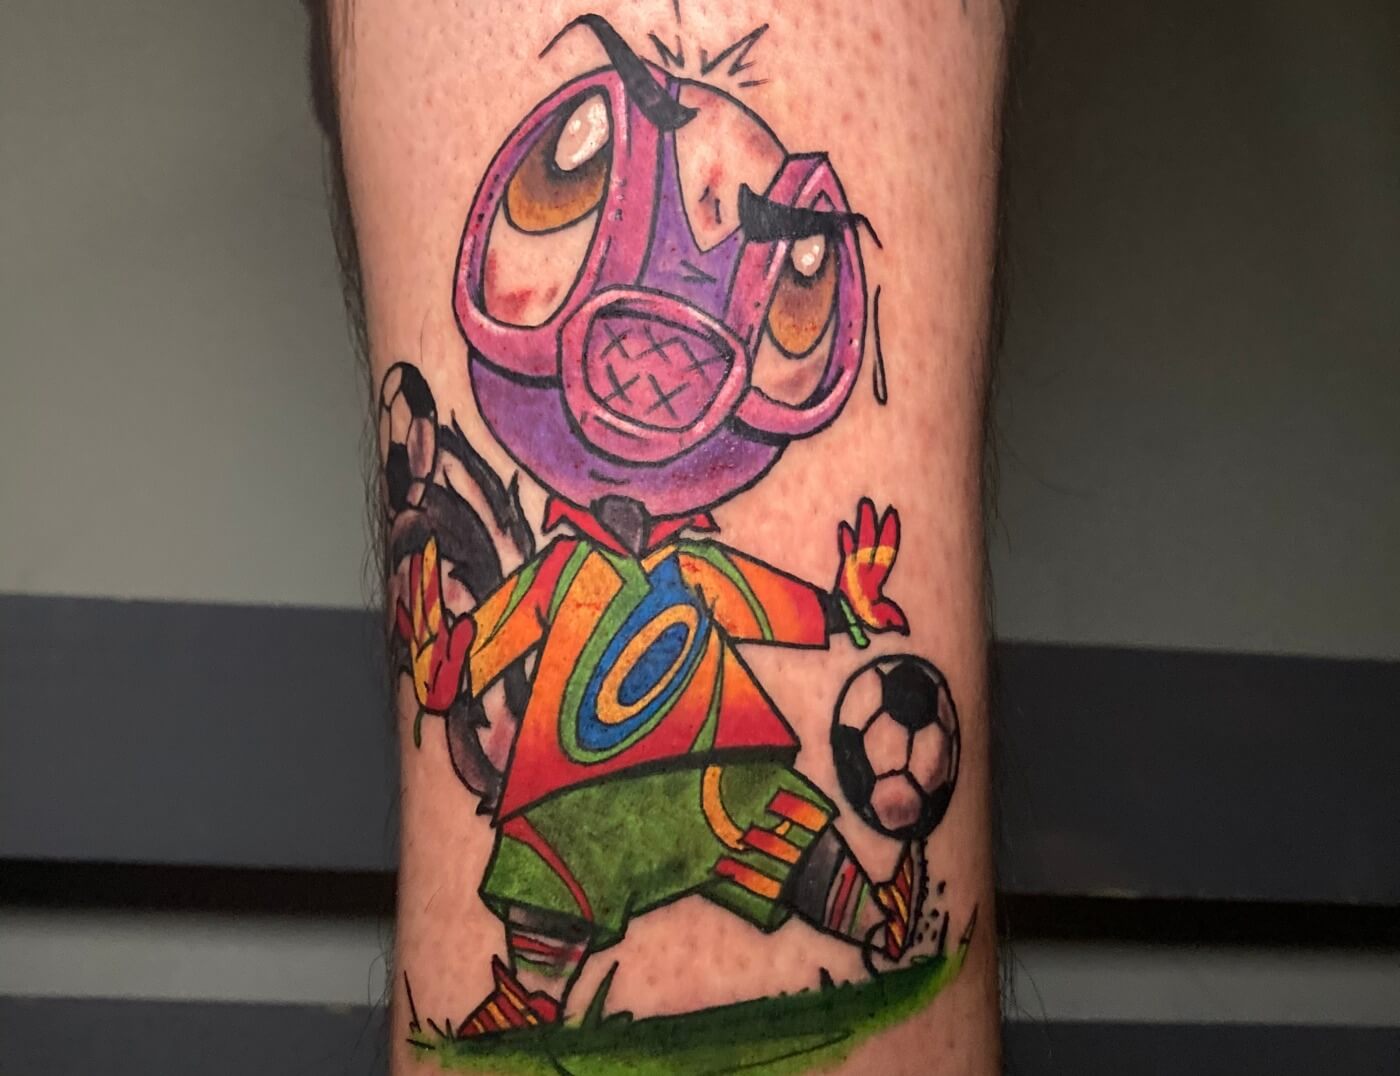 P.U. Tha Skunk In Jorge Campos' Mexican Soccer Jersey Color Cartoon Tattoo By Funk Tha World At Iron Palm Tattoos. We love the vivid color scheme. This tattoo was made by Funk for Jose Deanda-Carrillo IG:@jose_suavo_09, P.U. ThaSkunk IG:@p.u.thaskunk is a animation concept created by Funk and loved so much by his fans they get tattoos of the character. Jose wanted the character as a tribute to his favorite soccer star, Jorge Campos. We're open late night til 2AM most nights. Call 404-973-7828 or stop by for a free consultation. Walk-Ins are welcome.